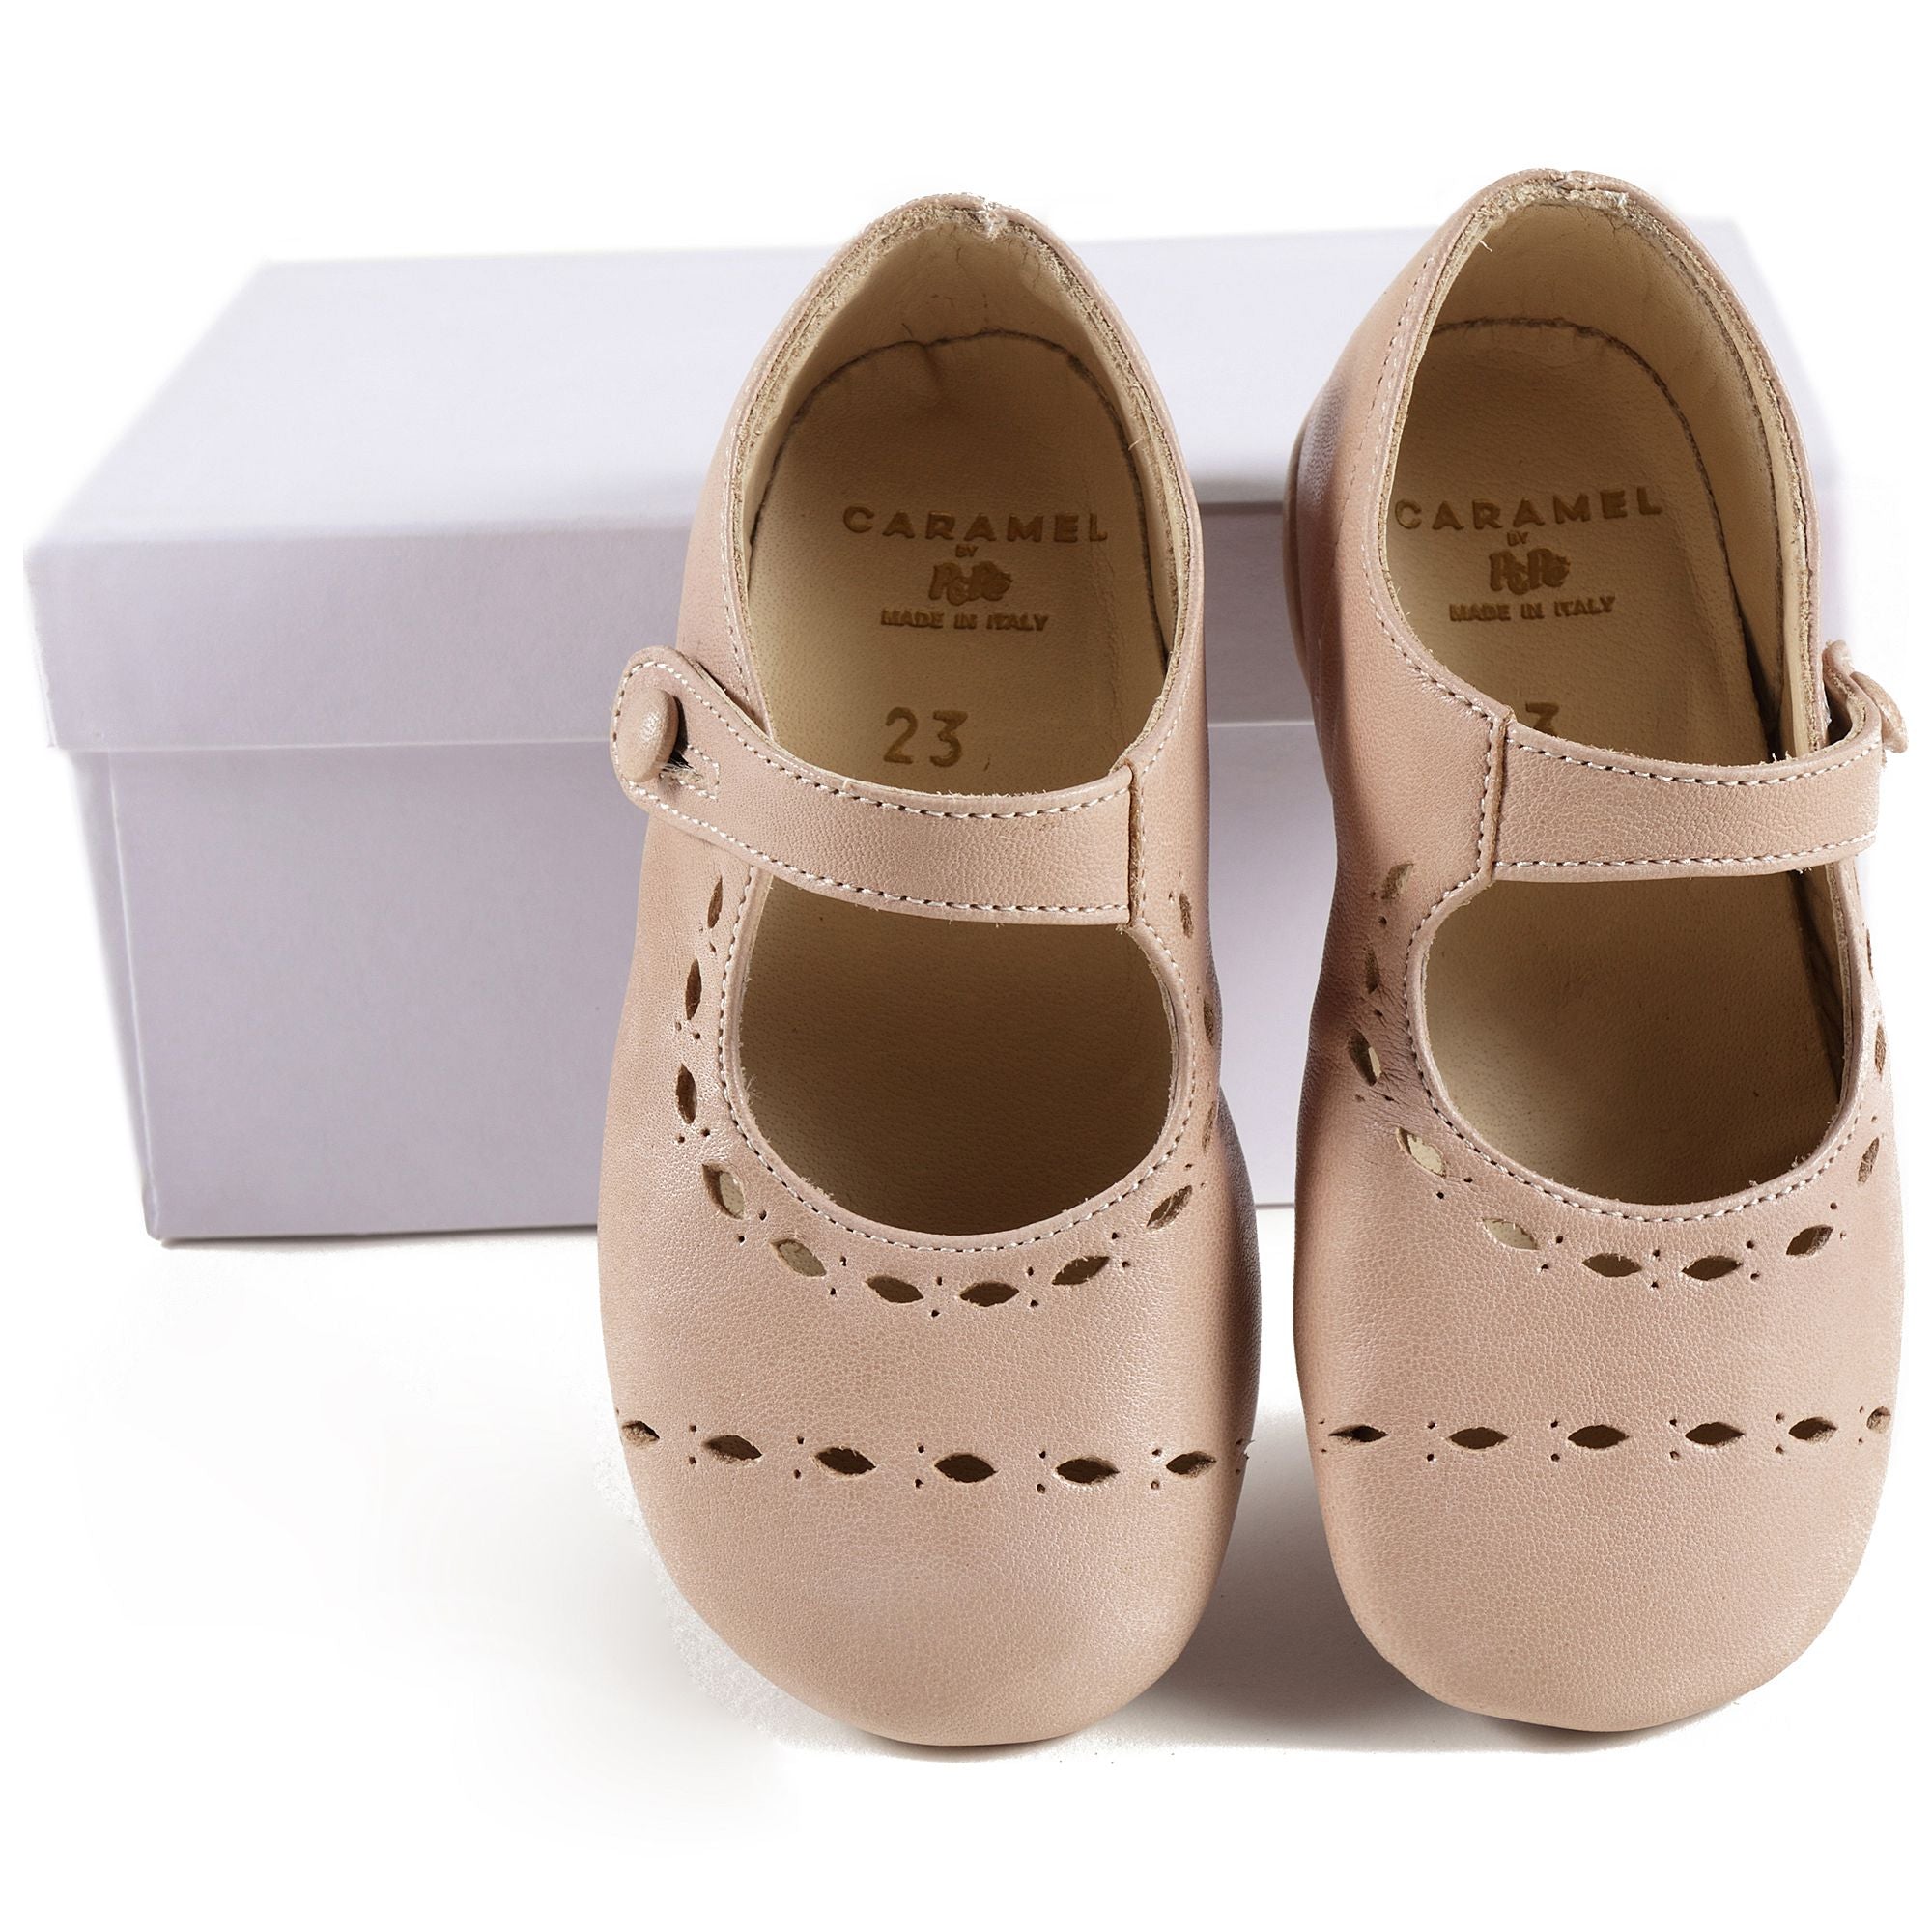 Girls Pink Leather Shoes